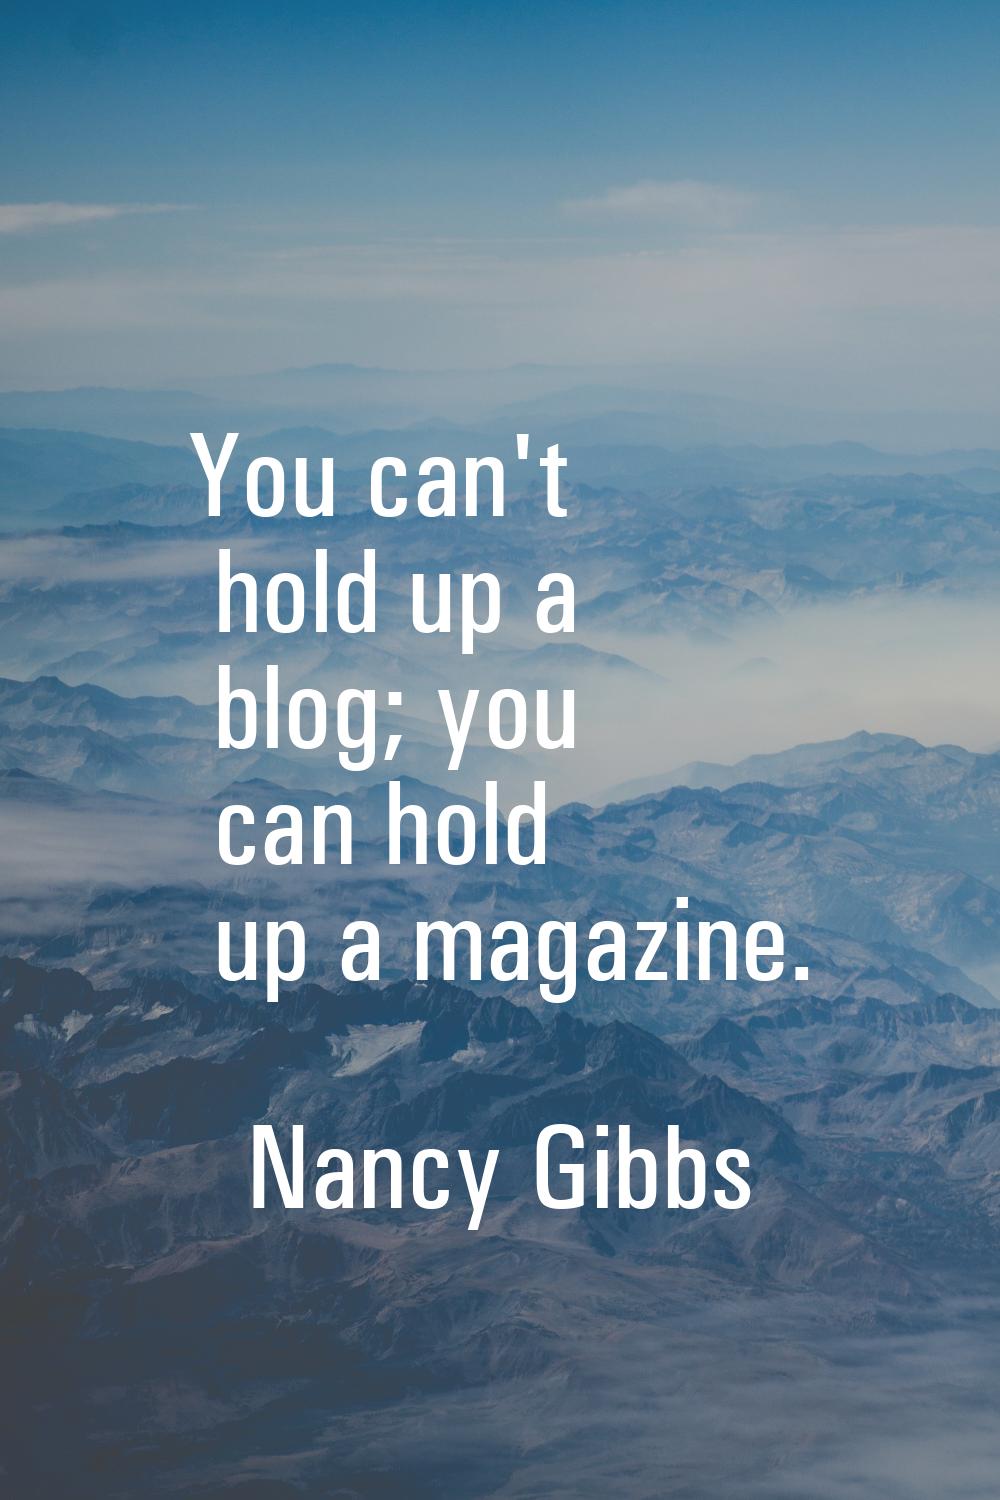 You can't hold up a blog; you can hold up a magazine.